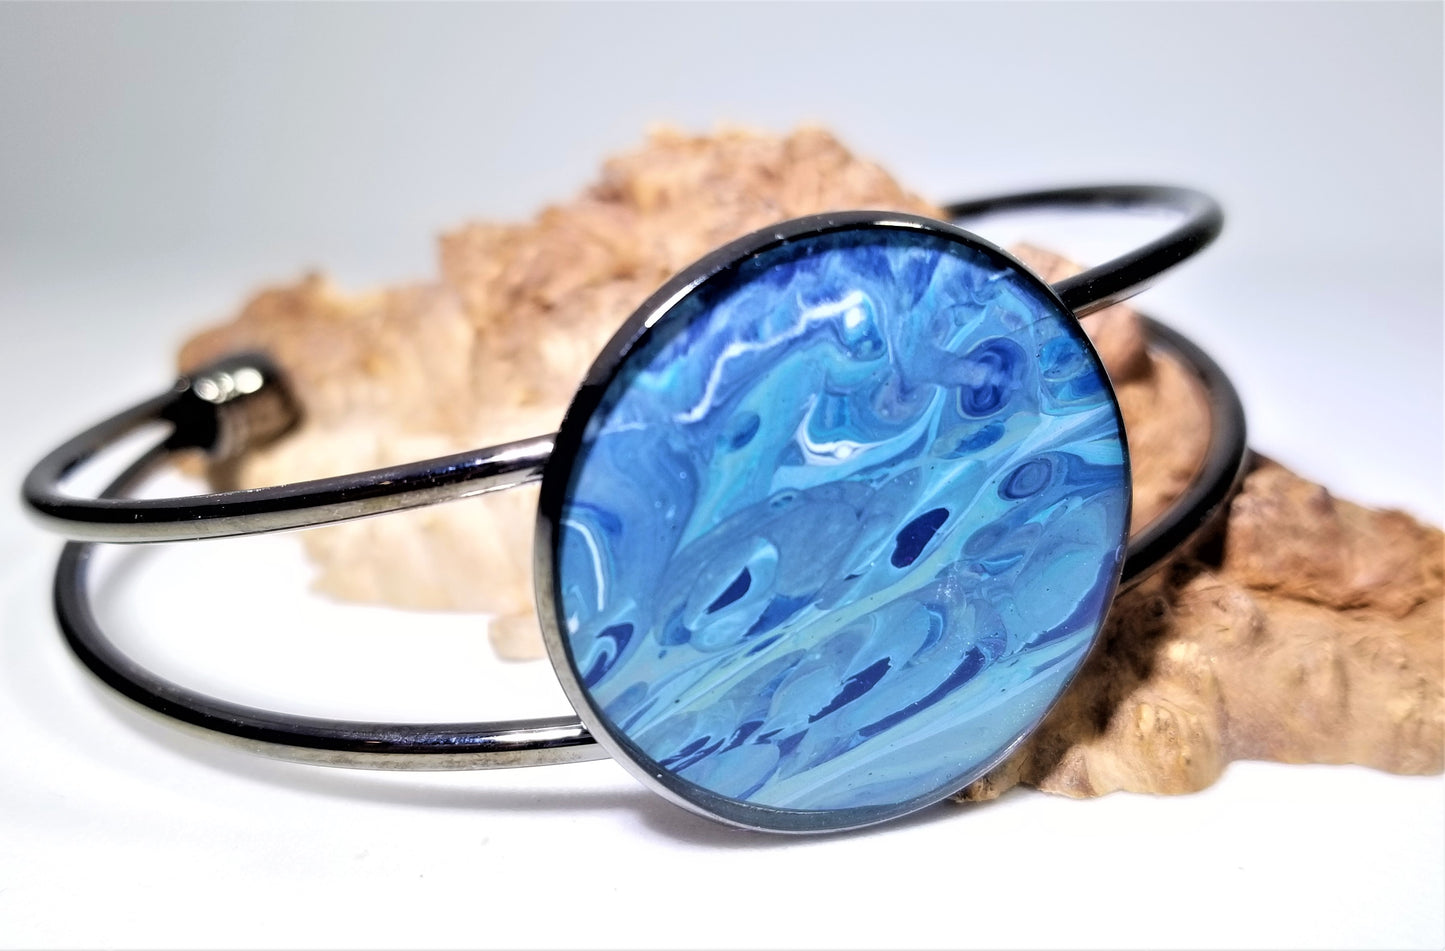 Acrylic Pour Skin with Resin Dome / Cuff Bangle Bracelet